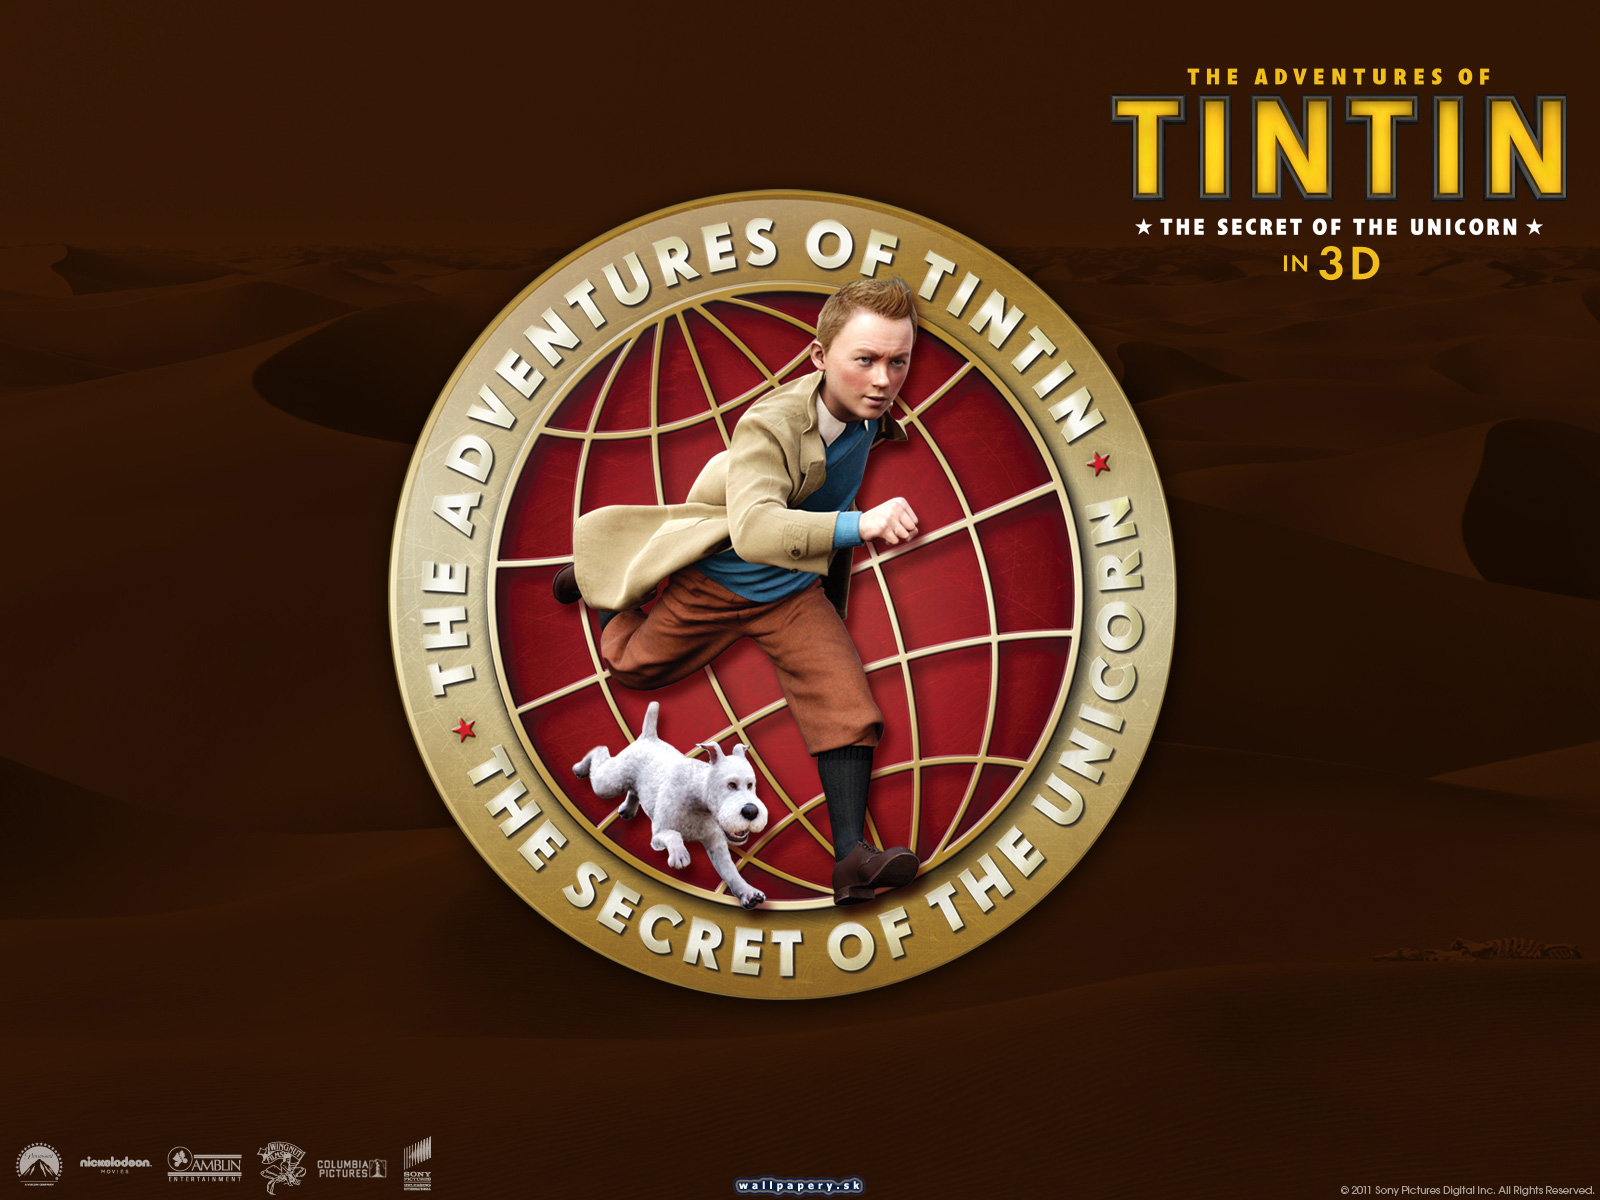 The Adventures of Tintin: The Secret of the Unicorn - The Game - wallpaper 6